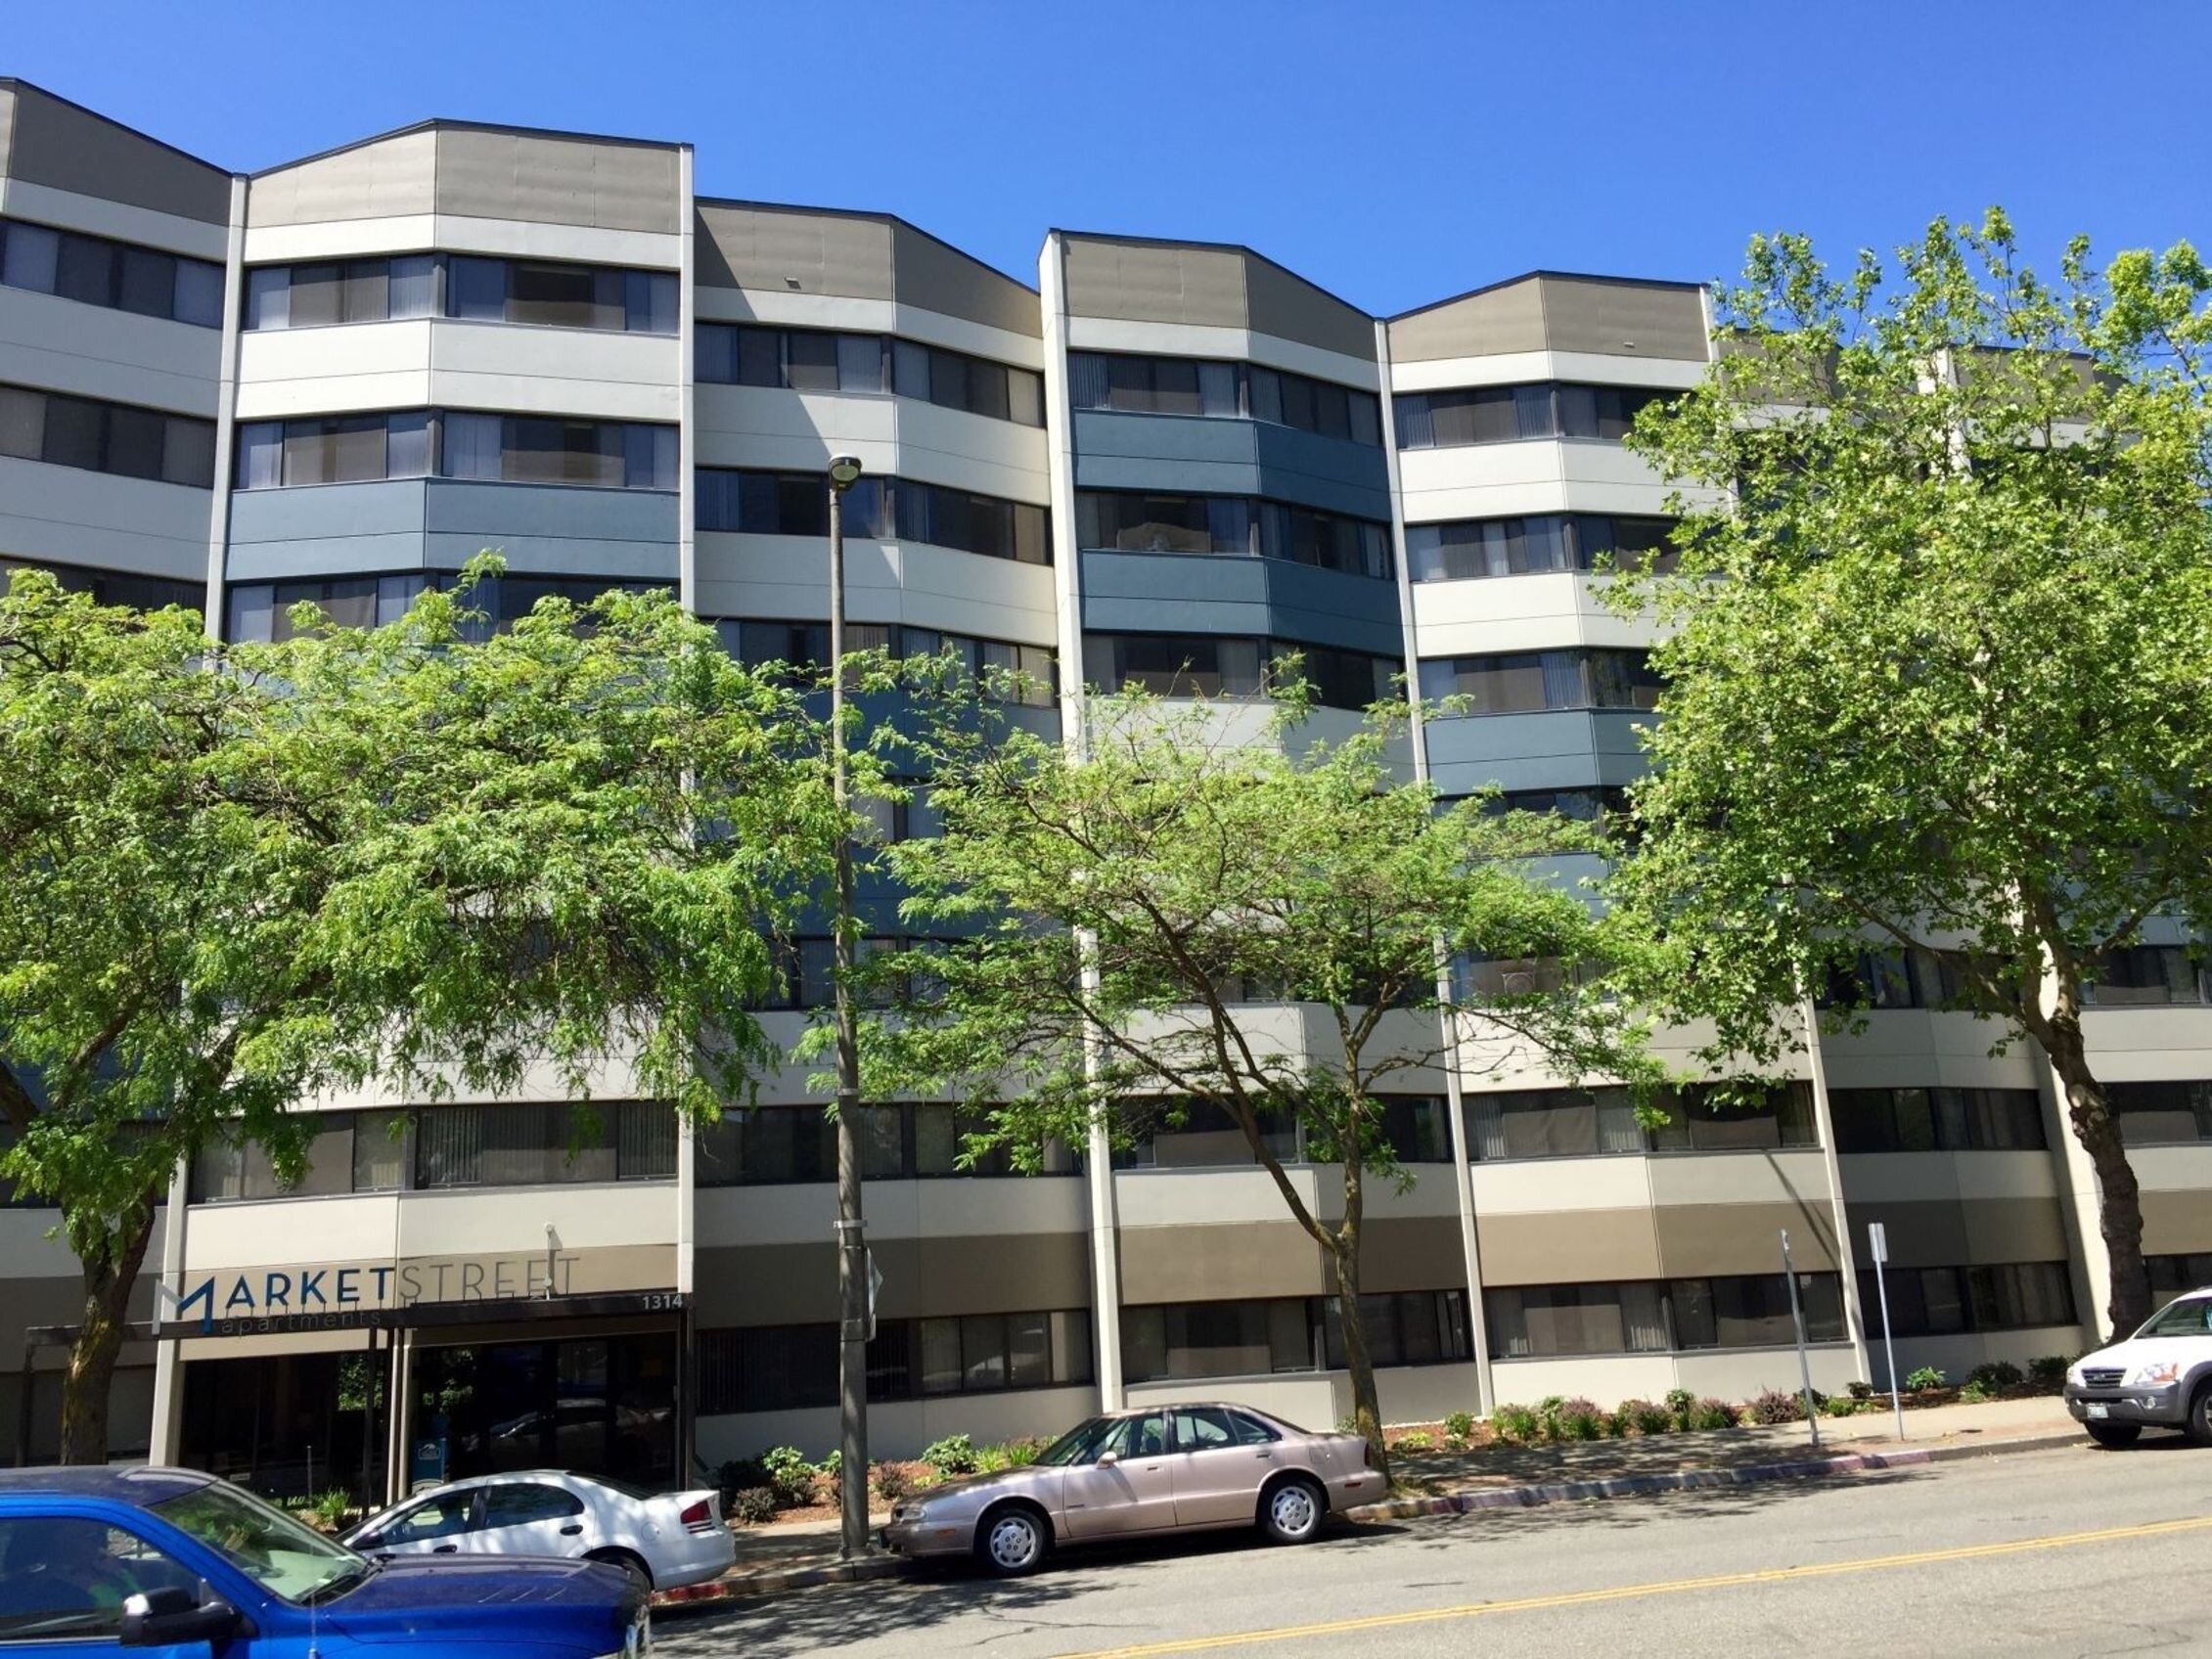 USG Realty Capital Adds 176-Unit Market Street Multifamily Development in Tacoma to Its Unique Opportunity Zone Fund Portfolio